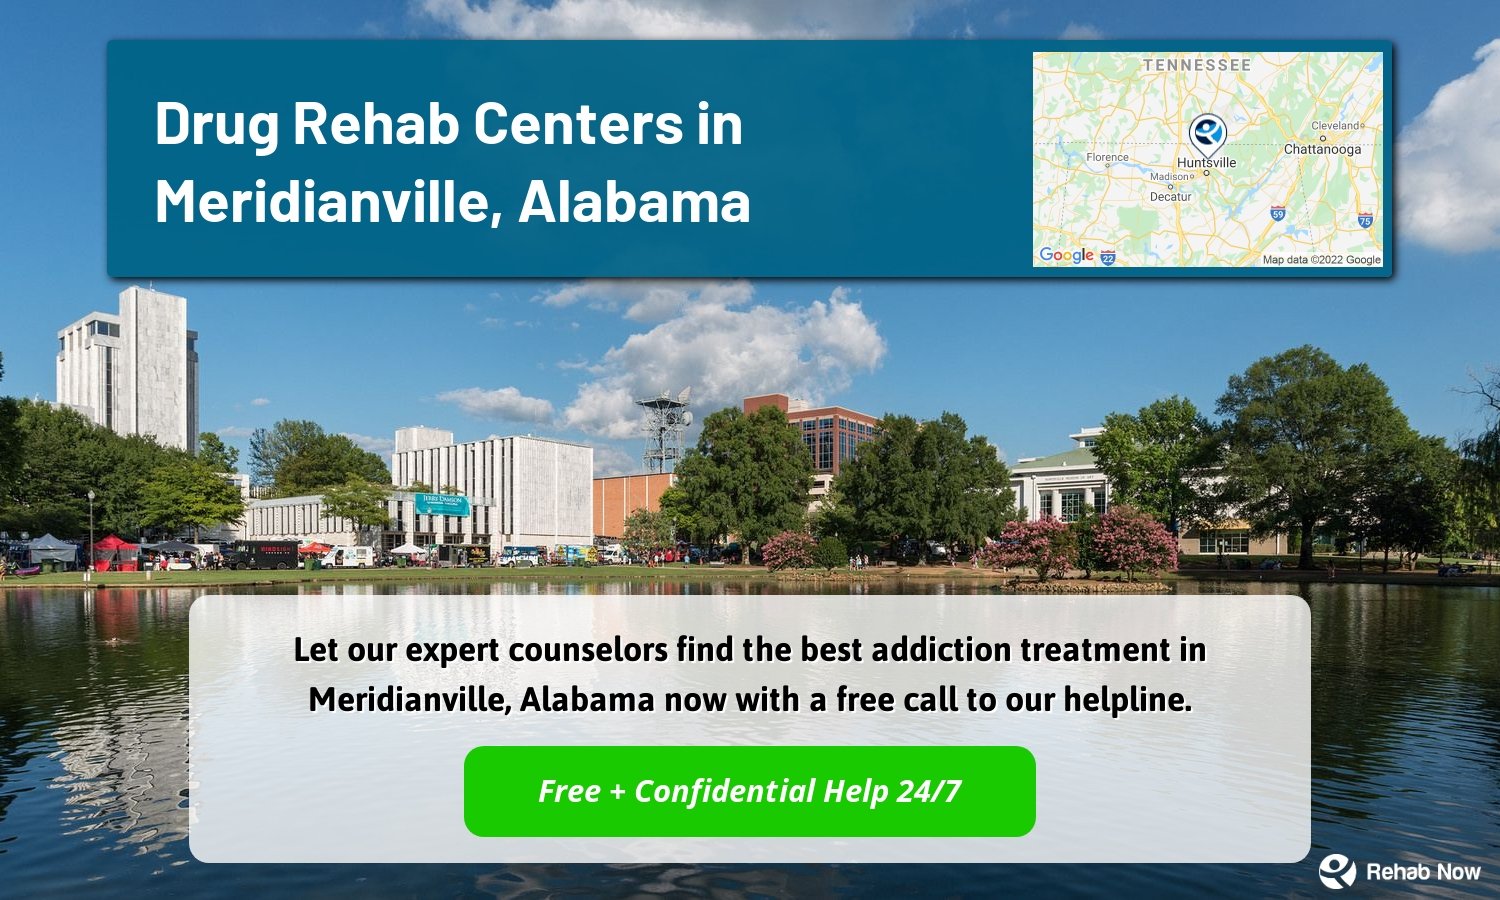 Let our expert counselors find the best addiction treatment in Meridianville, Alabama now with a free call to our helpline.